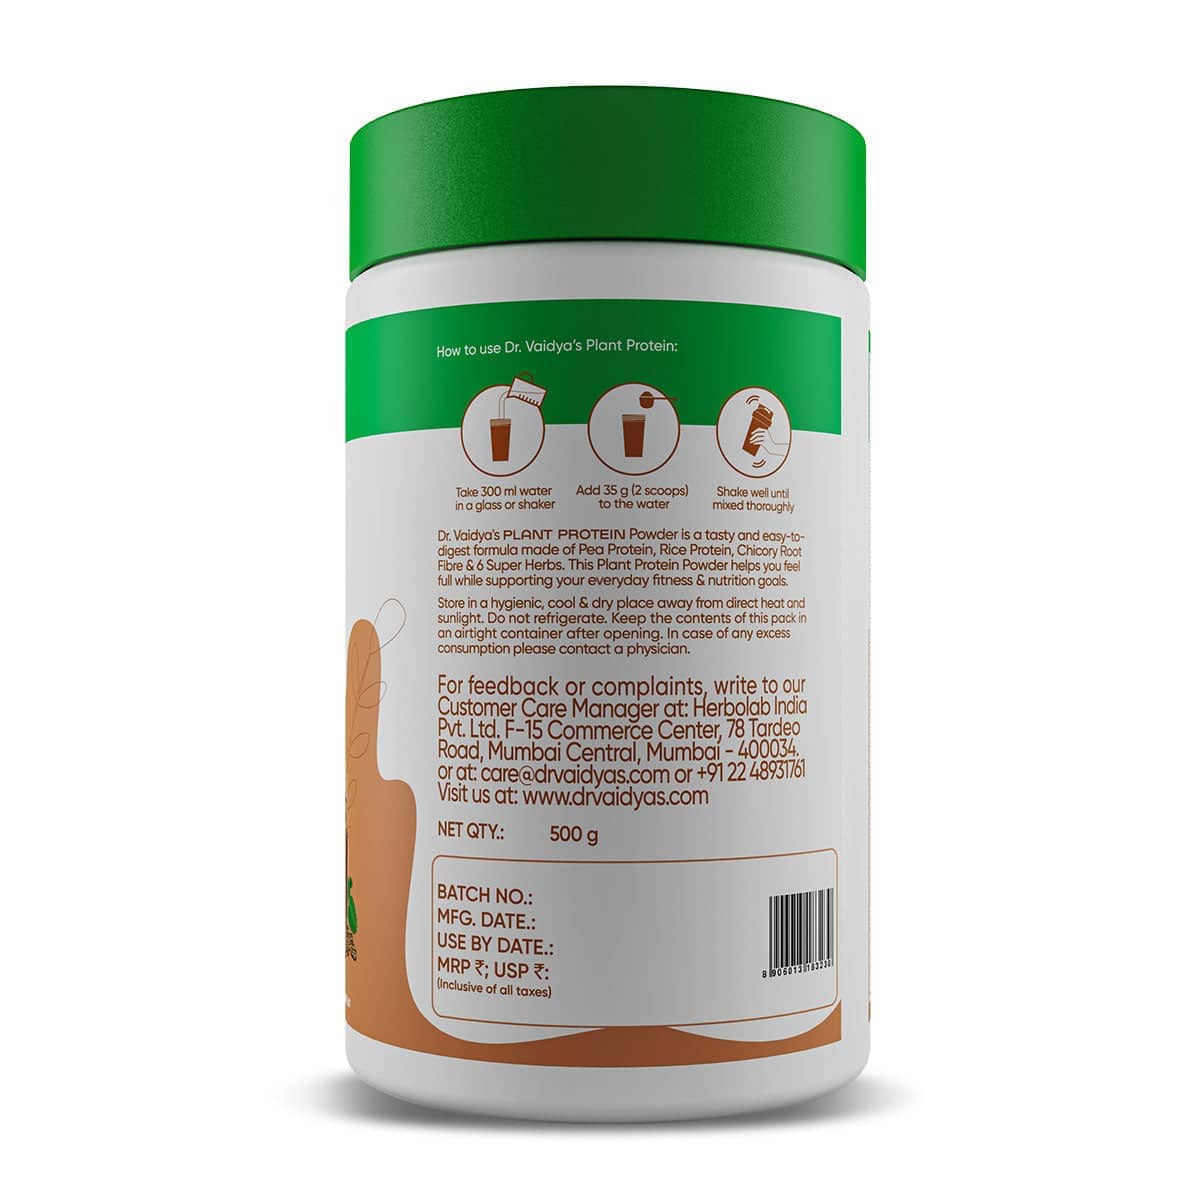 Plant Protein Powder: First-Ever Plant Protein Enriched With Methi, Ashwagandha and Ajwain by Dr. Vaidya's (Pack of 1)